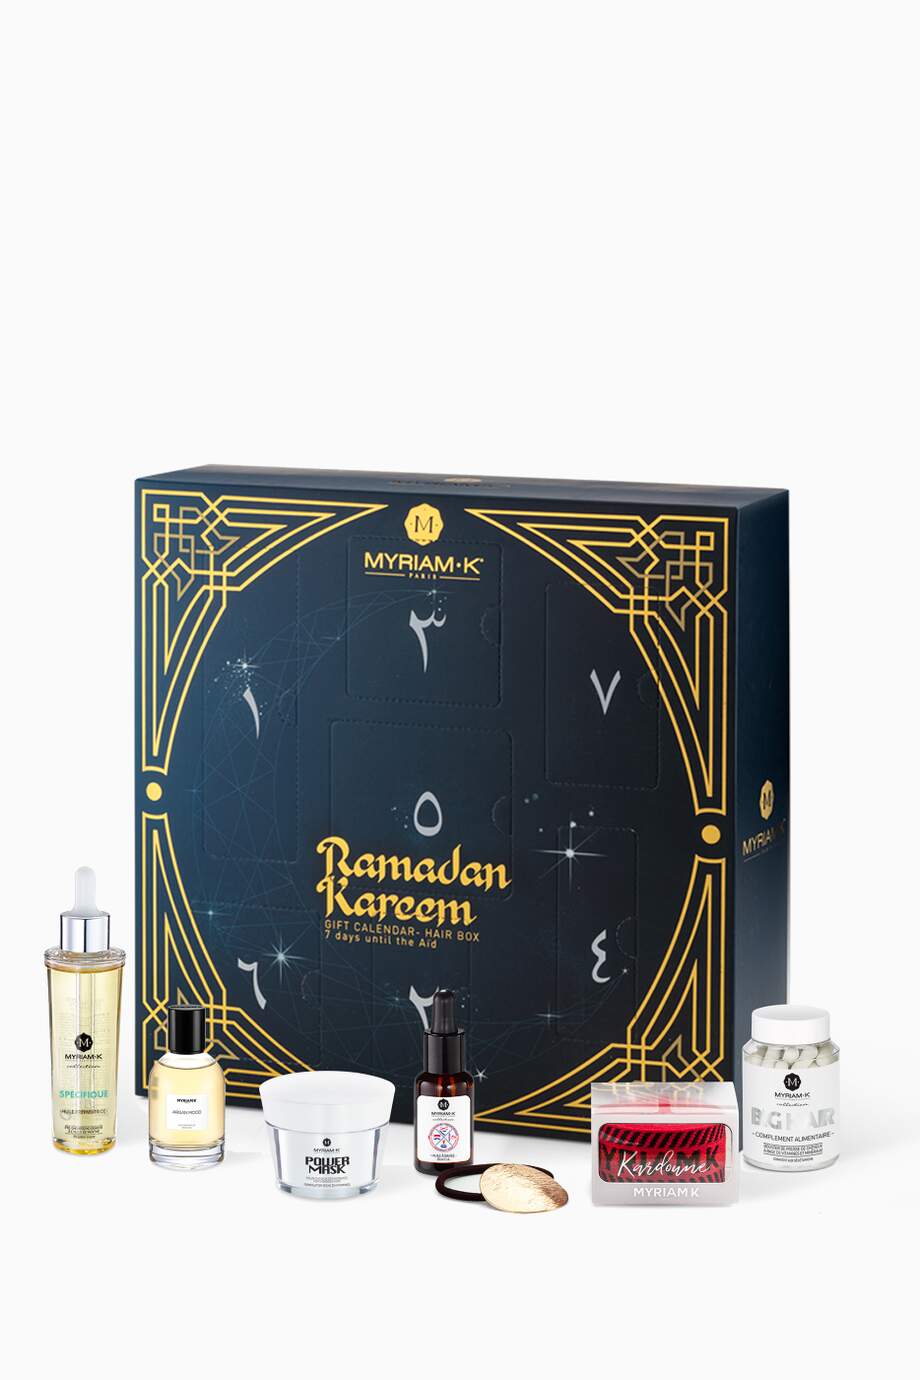 What is a Ramadan calendar and where can you get one?